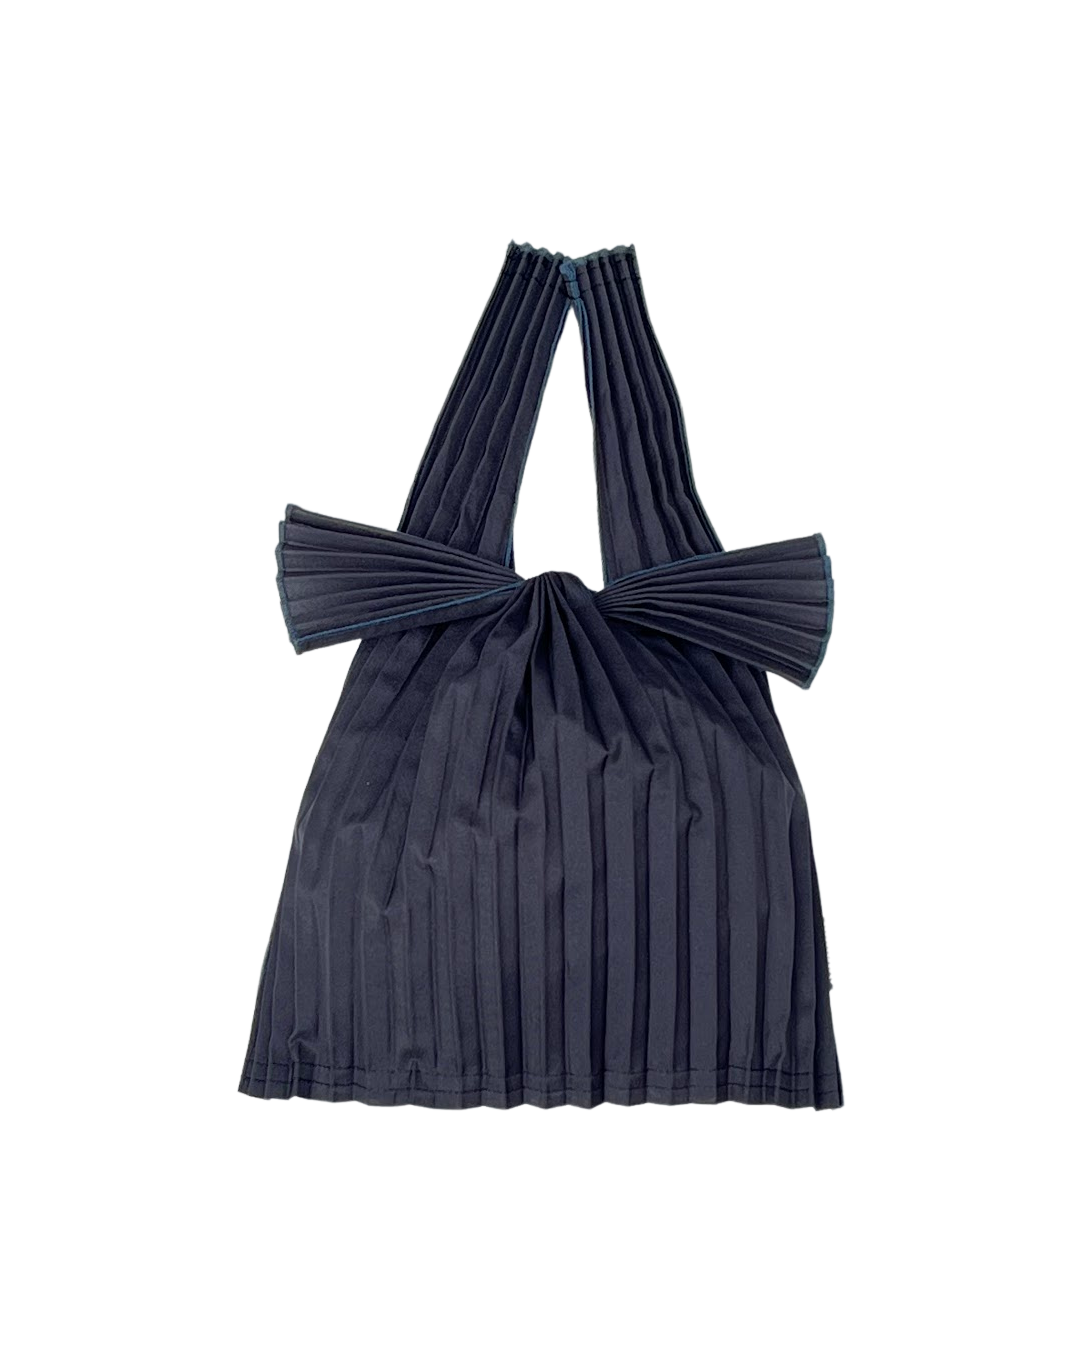 Small Black Pleated Pleco Tote Bag by KNA Plus at Abacus Row